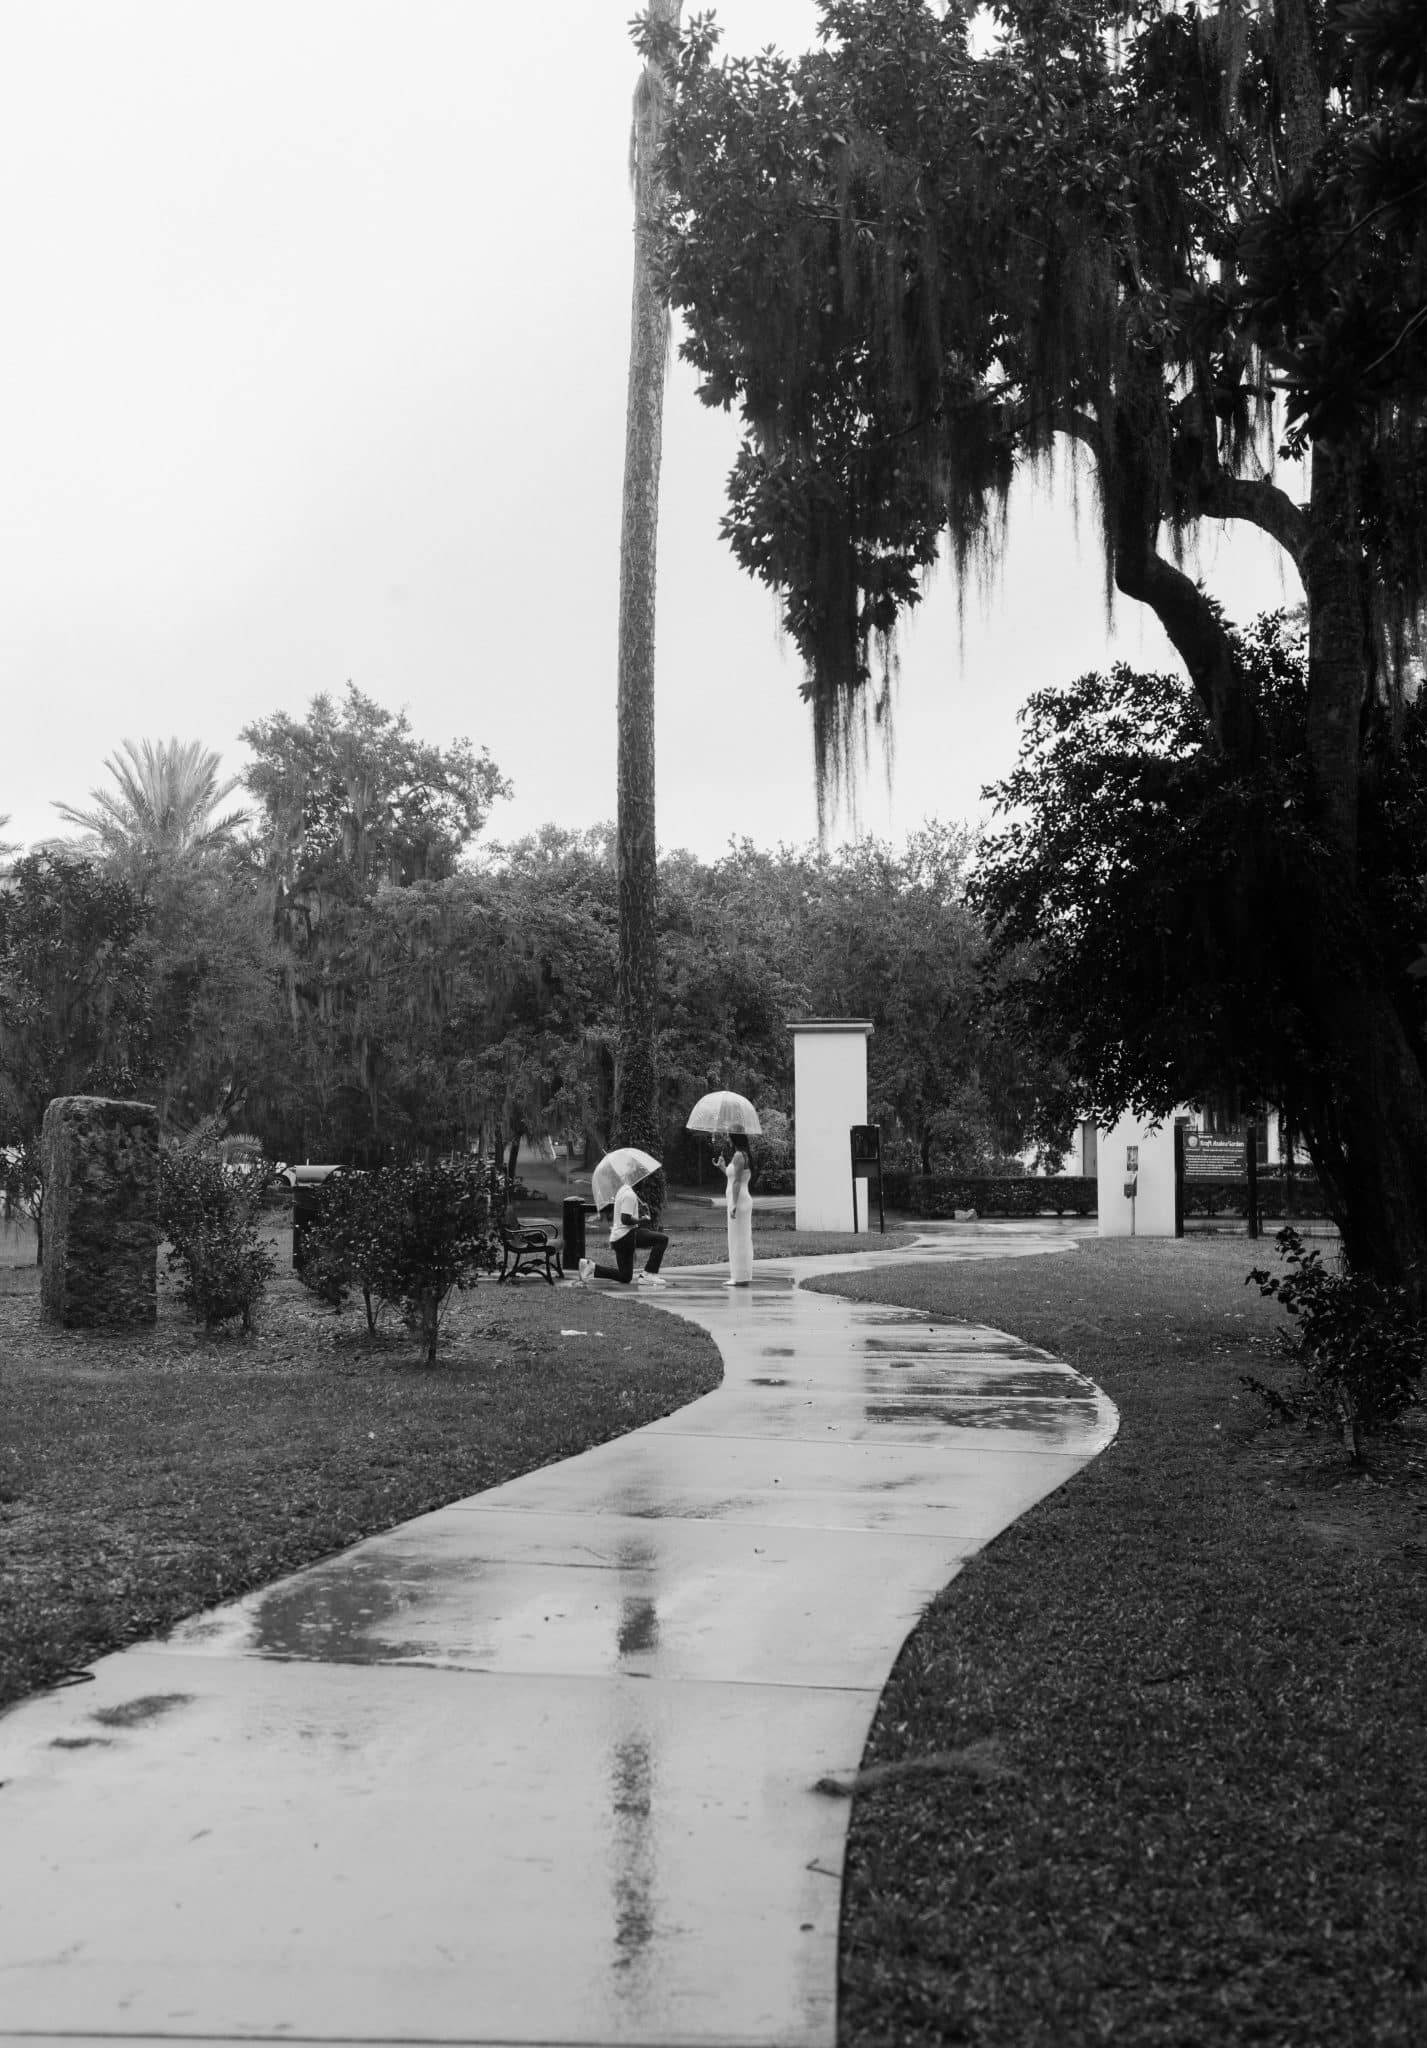 black and white picture of couple on sidewalk with umbrellas in the rain while man is on one knee proposing